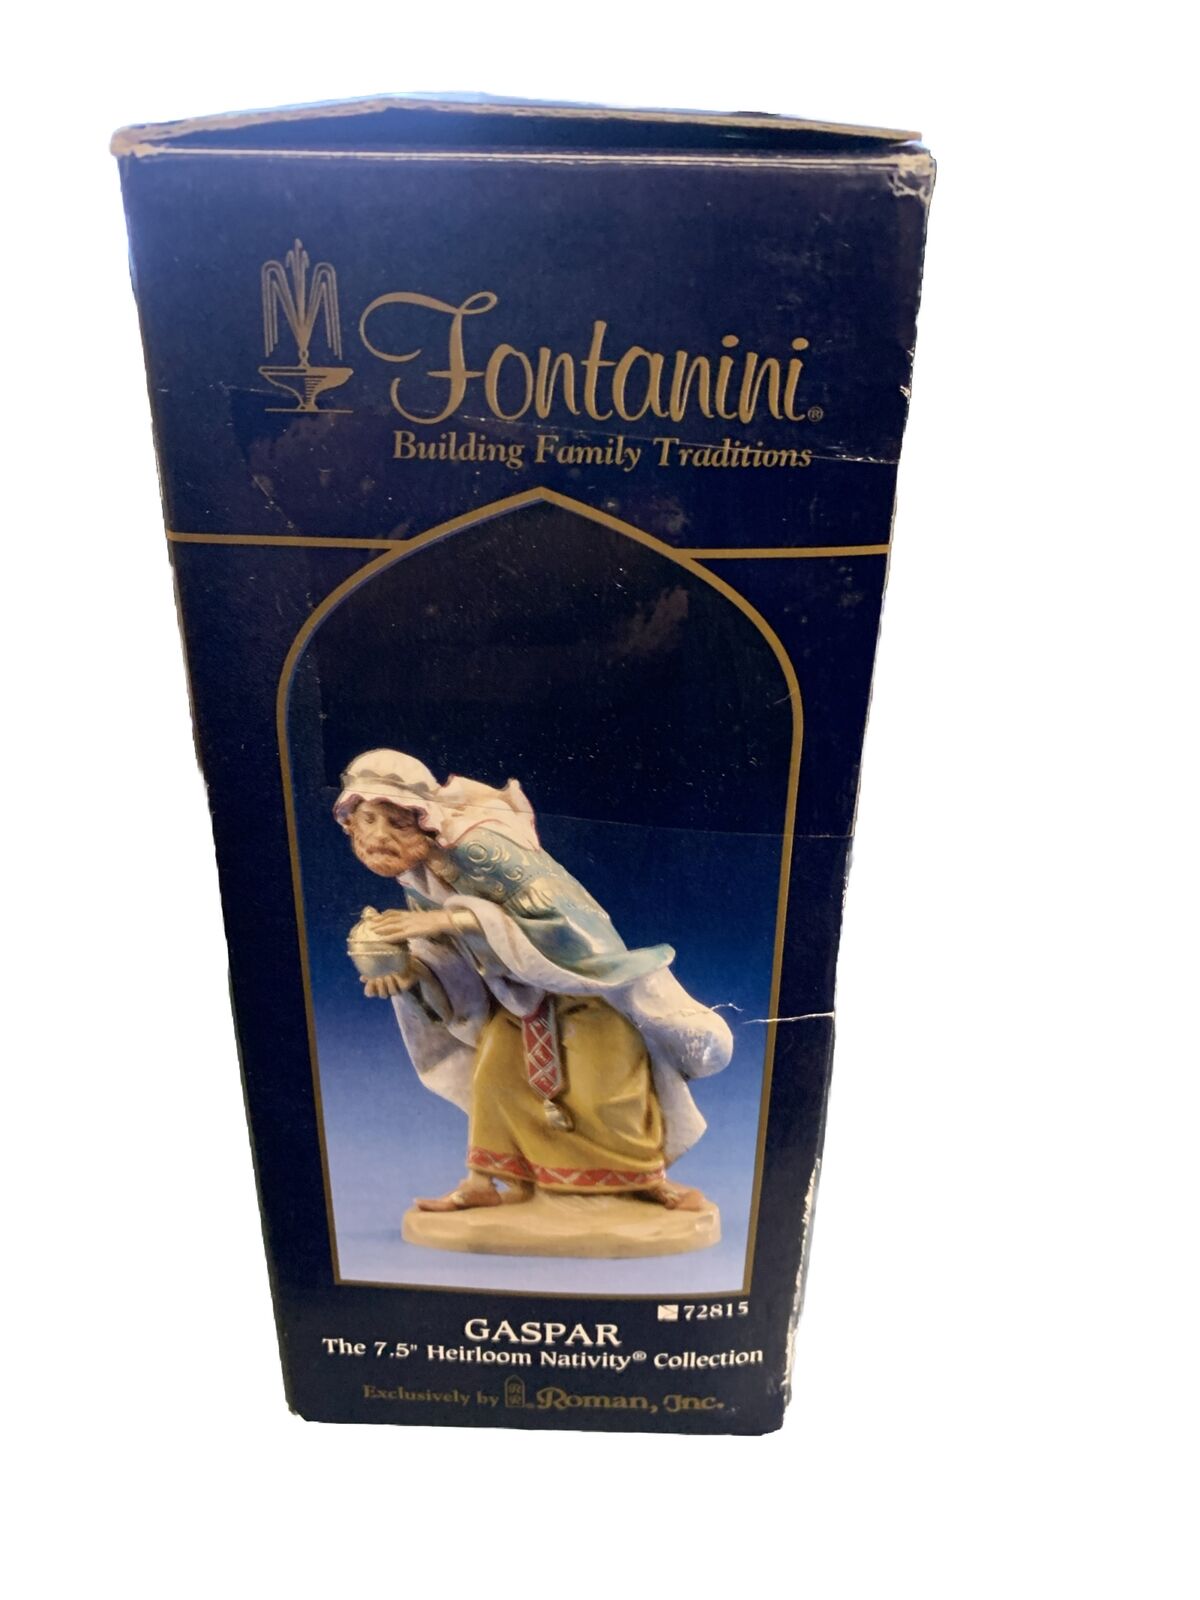 Gaspar from the Fontanini Nativity Collection 7.5 inch Figurine NIOB 72815 King